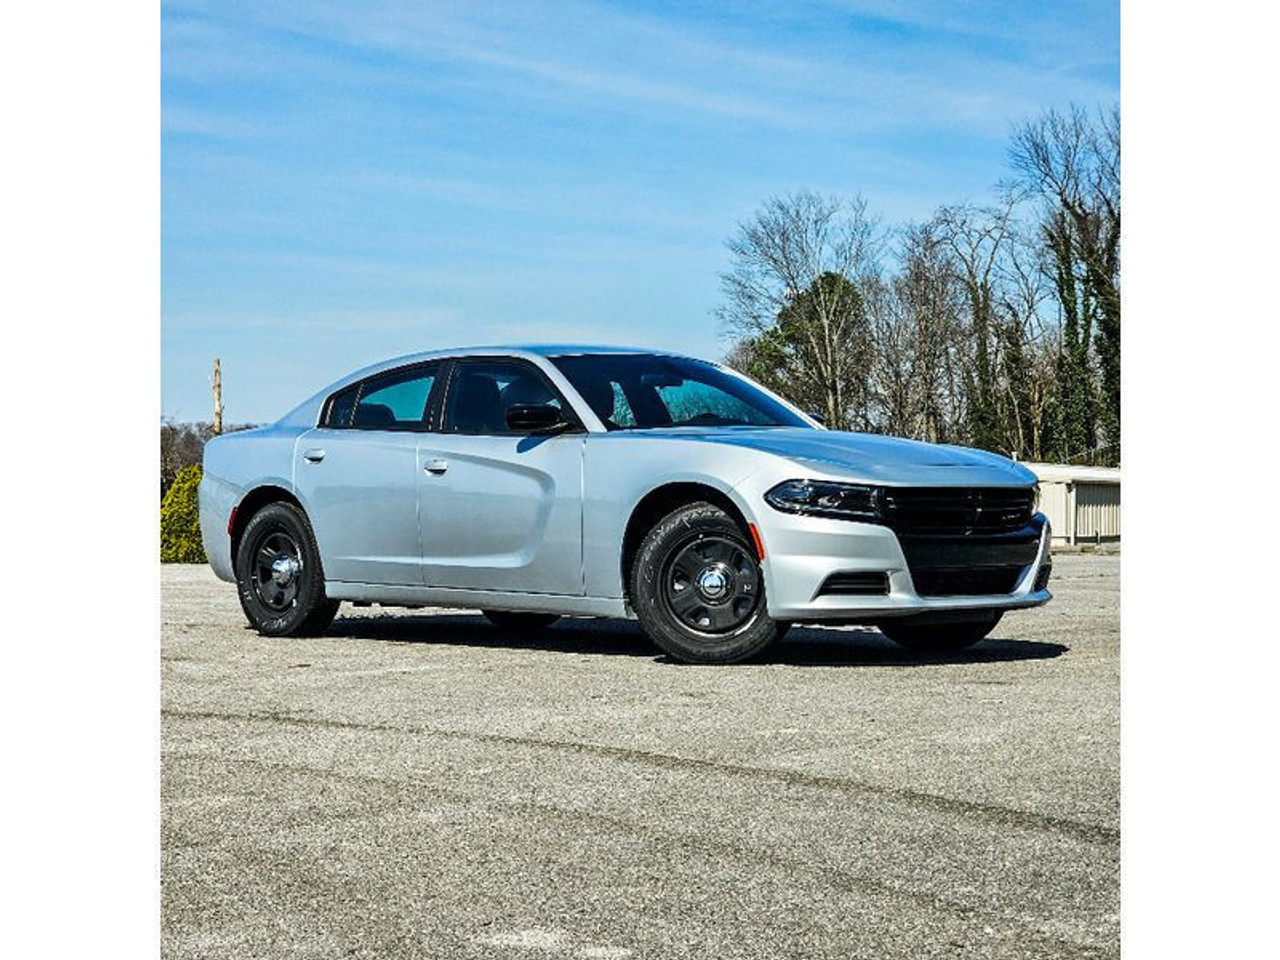 New 2023 Silver Dodge Charger PPV V8 RWD ready to be built as a Marked Patrol Package Police Pursuit Car (Emergency Lighting, Siren, Controller, Partition, Window Bars, etc.), + Delivery, S5